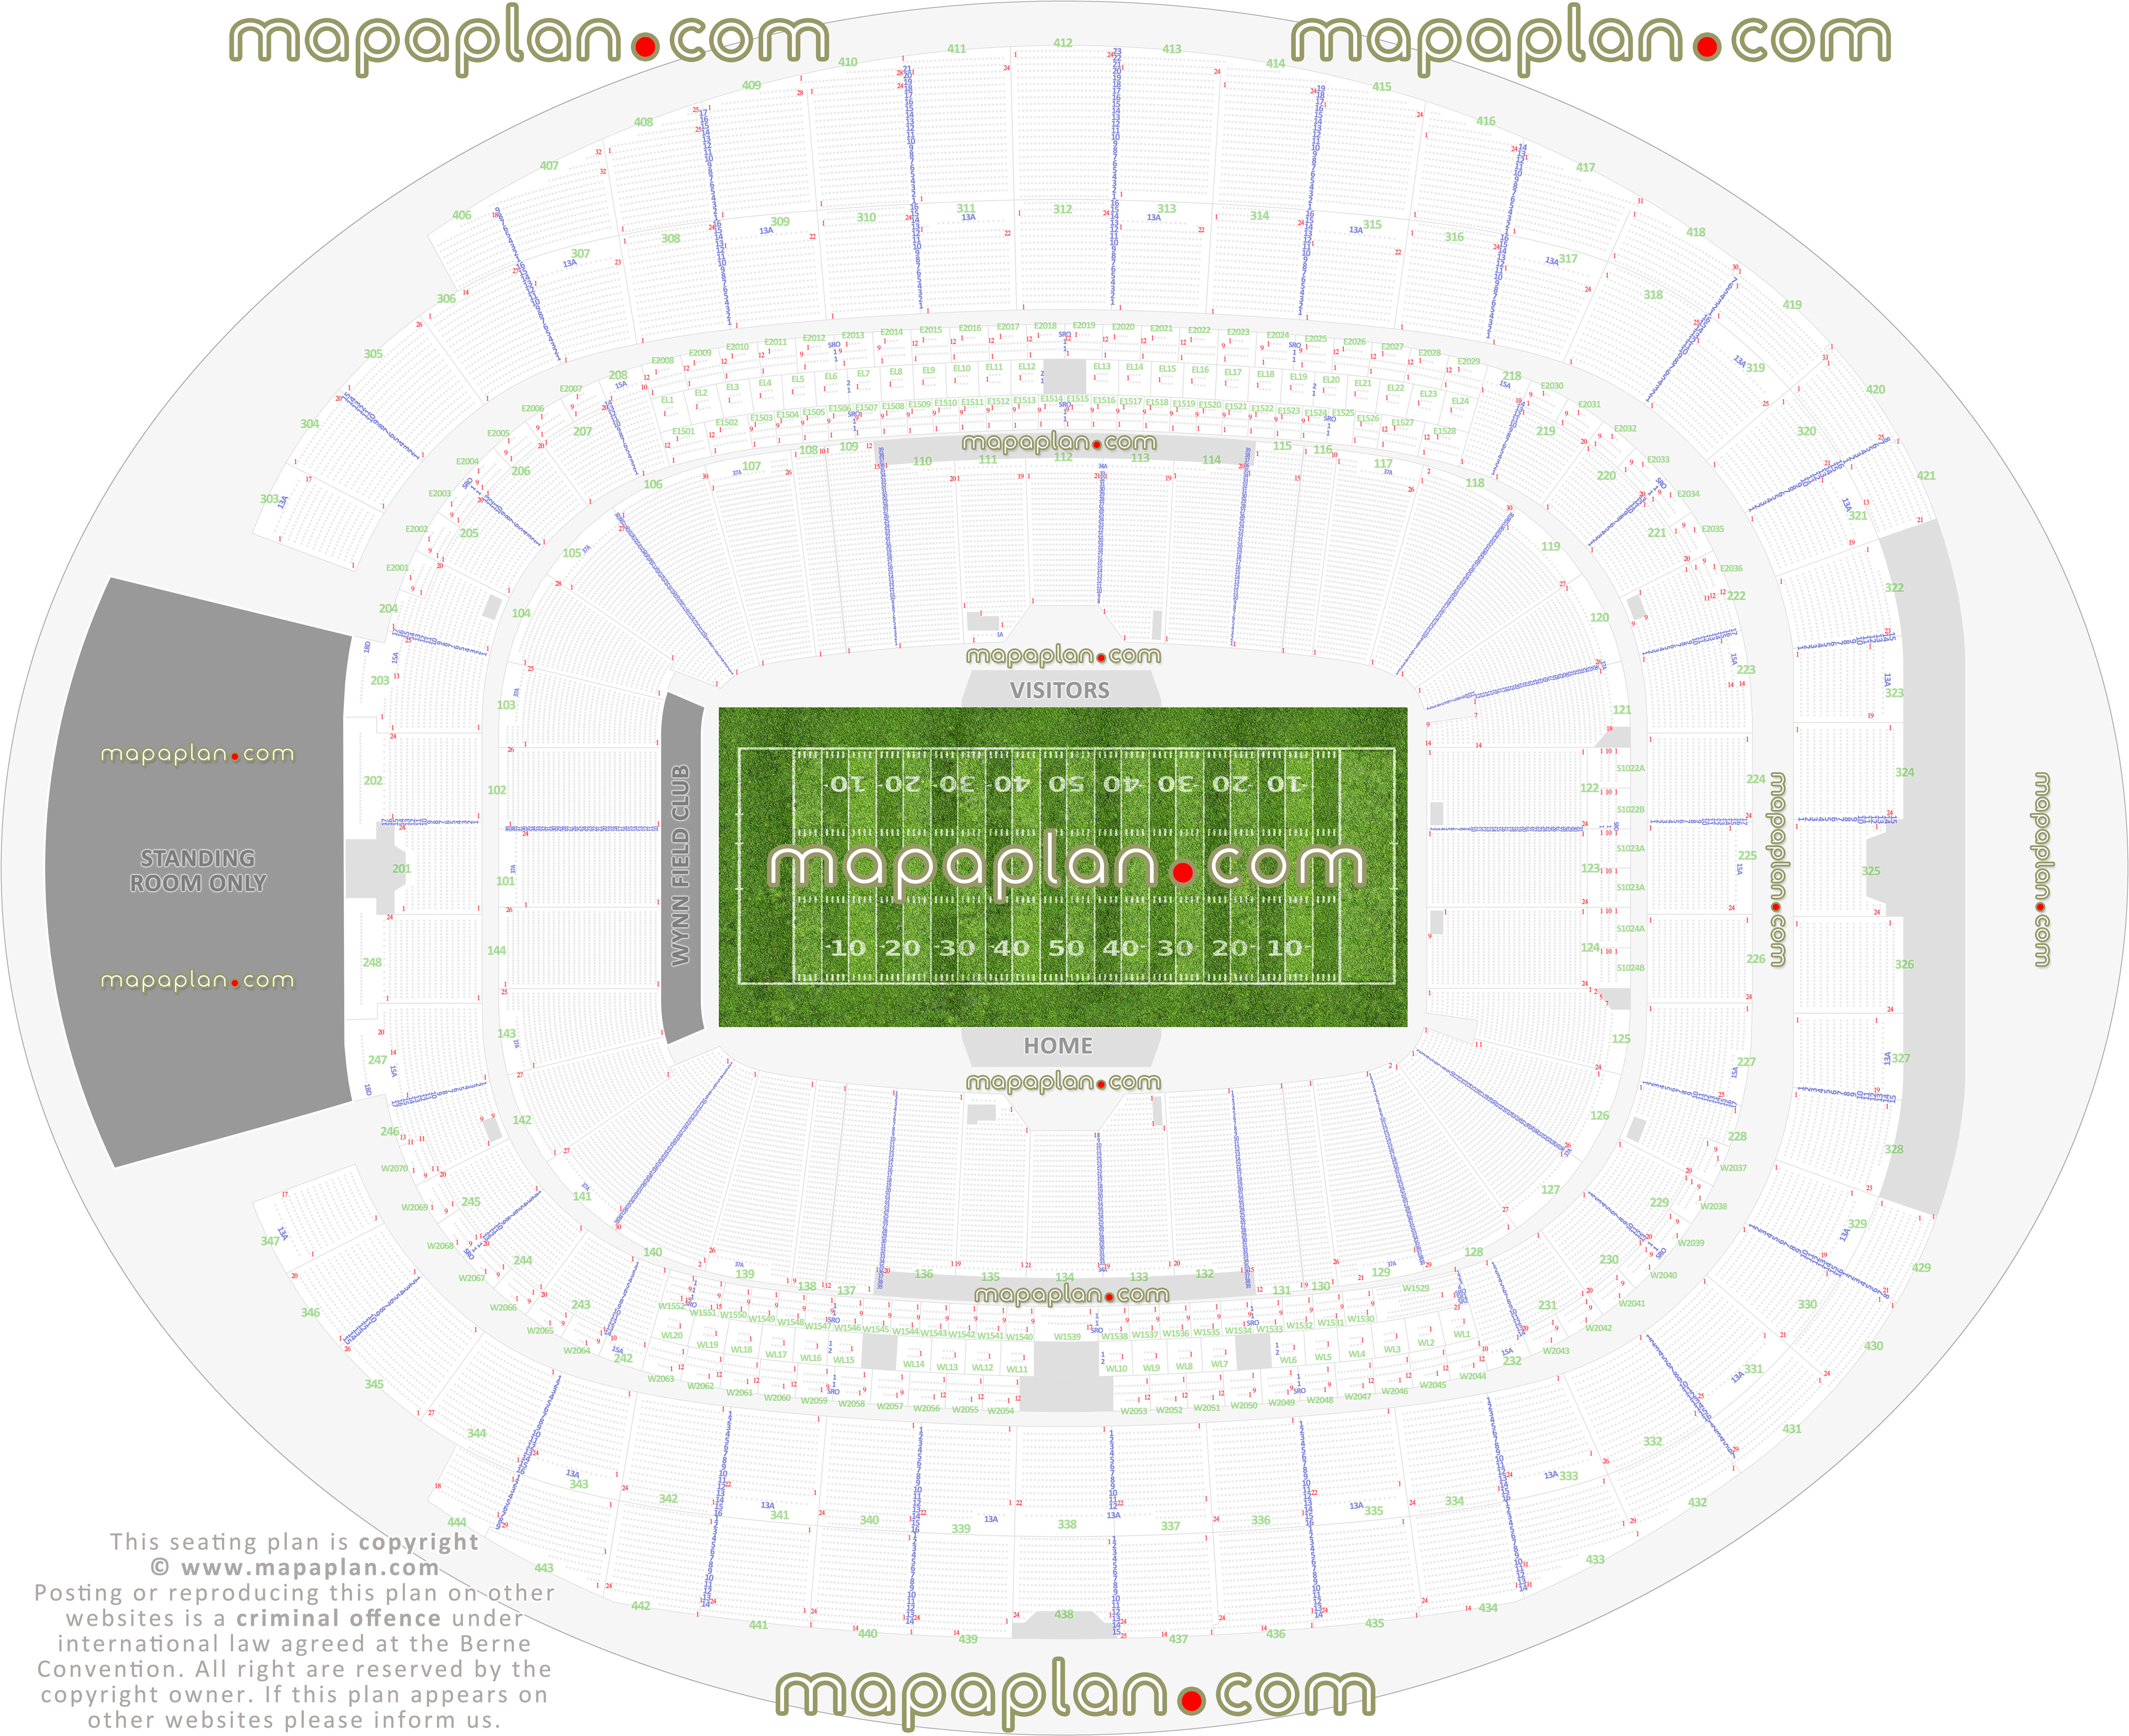 Las Vegas Allegiant Stadium seating chart map floor plan raiders football games row seat numbers unlv rebels arena diagram individual find seat locator seats row best seats rows numbered sections